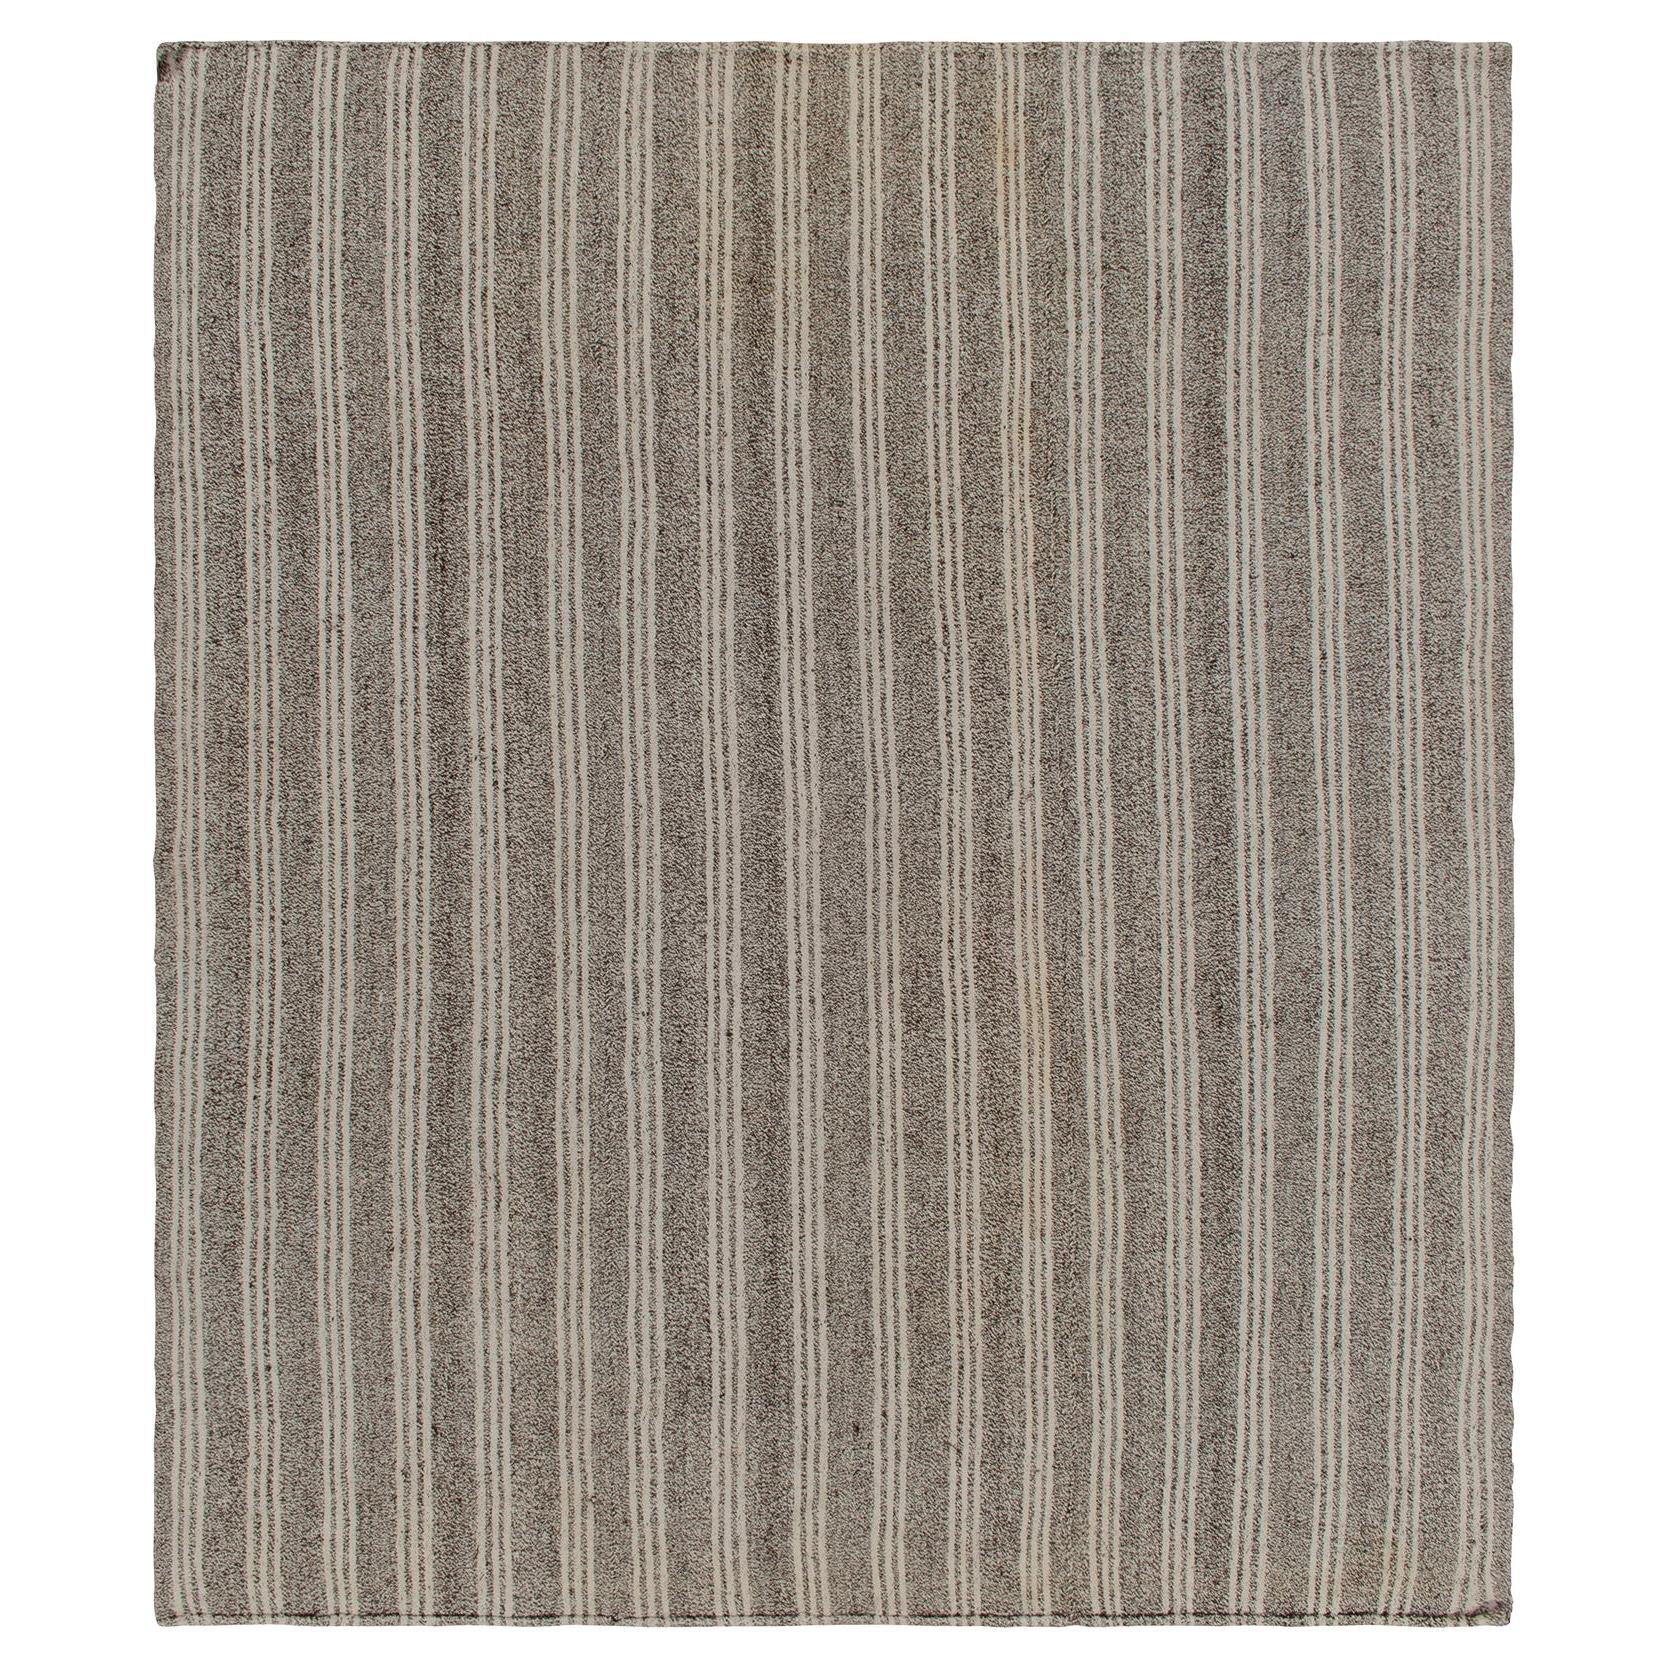 Vintage Striped Kilim in Gray Striations, Salt and Pepper Colors by Rug & Kilim For Sale